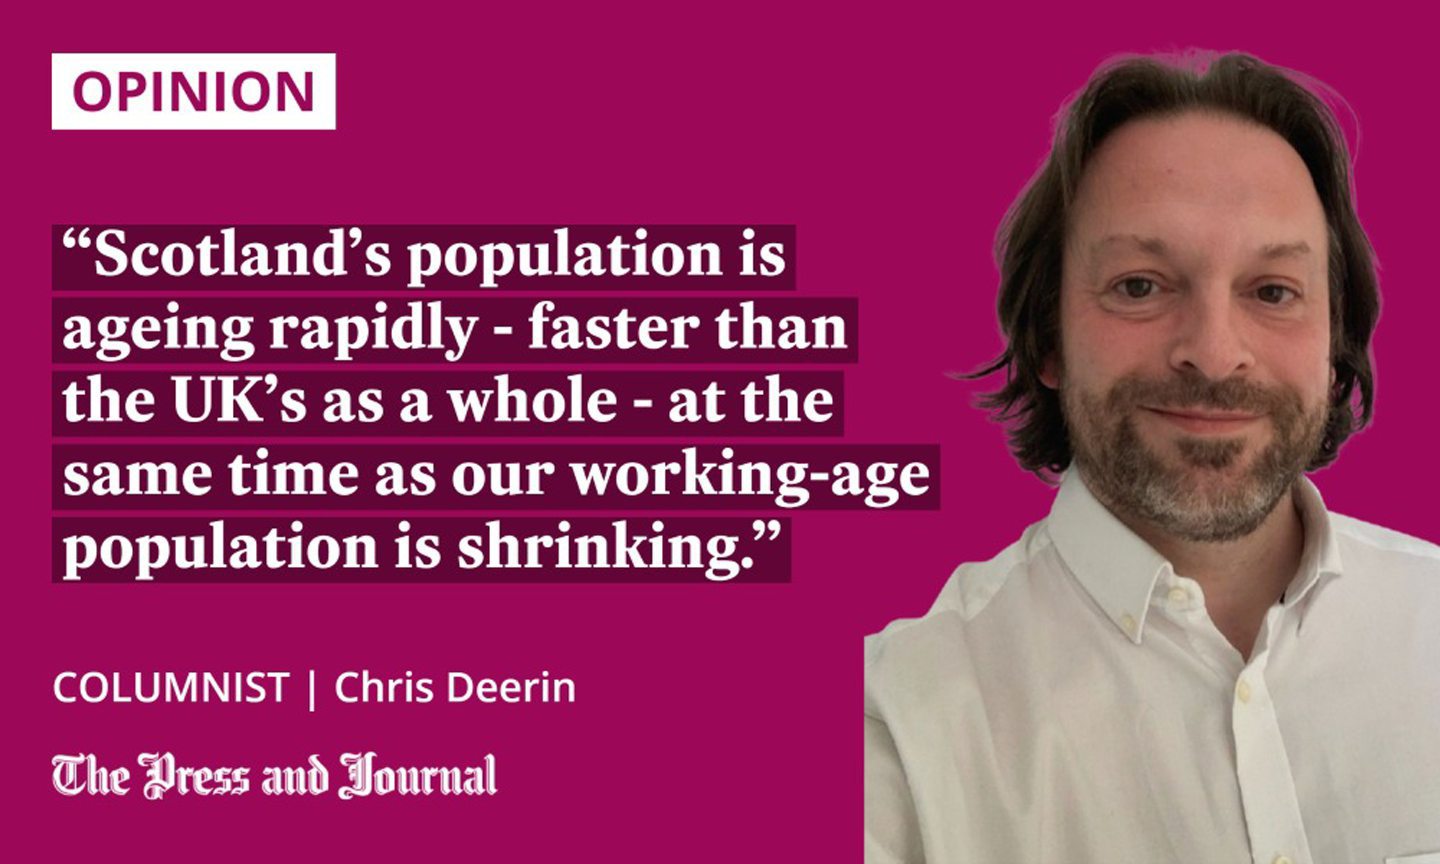 Columnist, Chris Deerin: "Scotland’s population is ageing rapidly - faster than the UK’s as a whole - at the same time as our working-age population is shrinking."